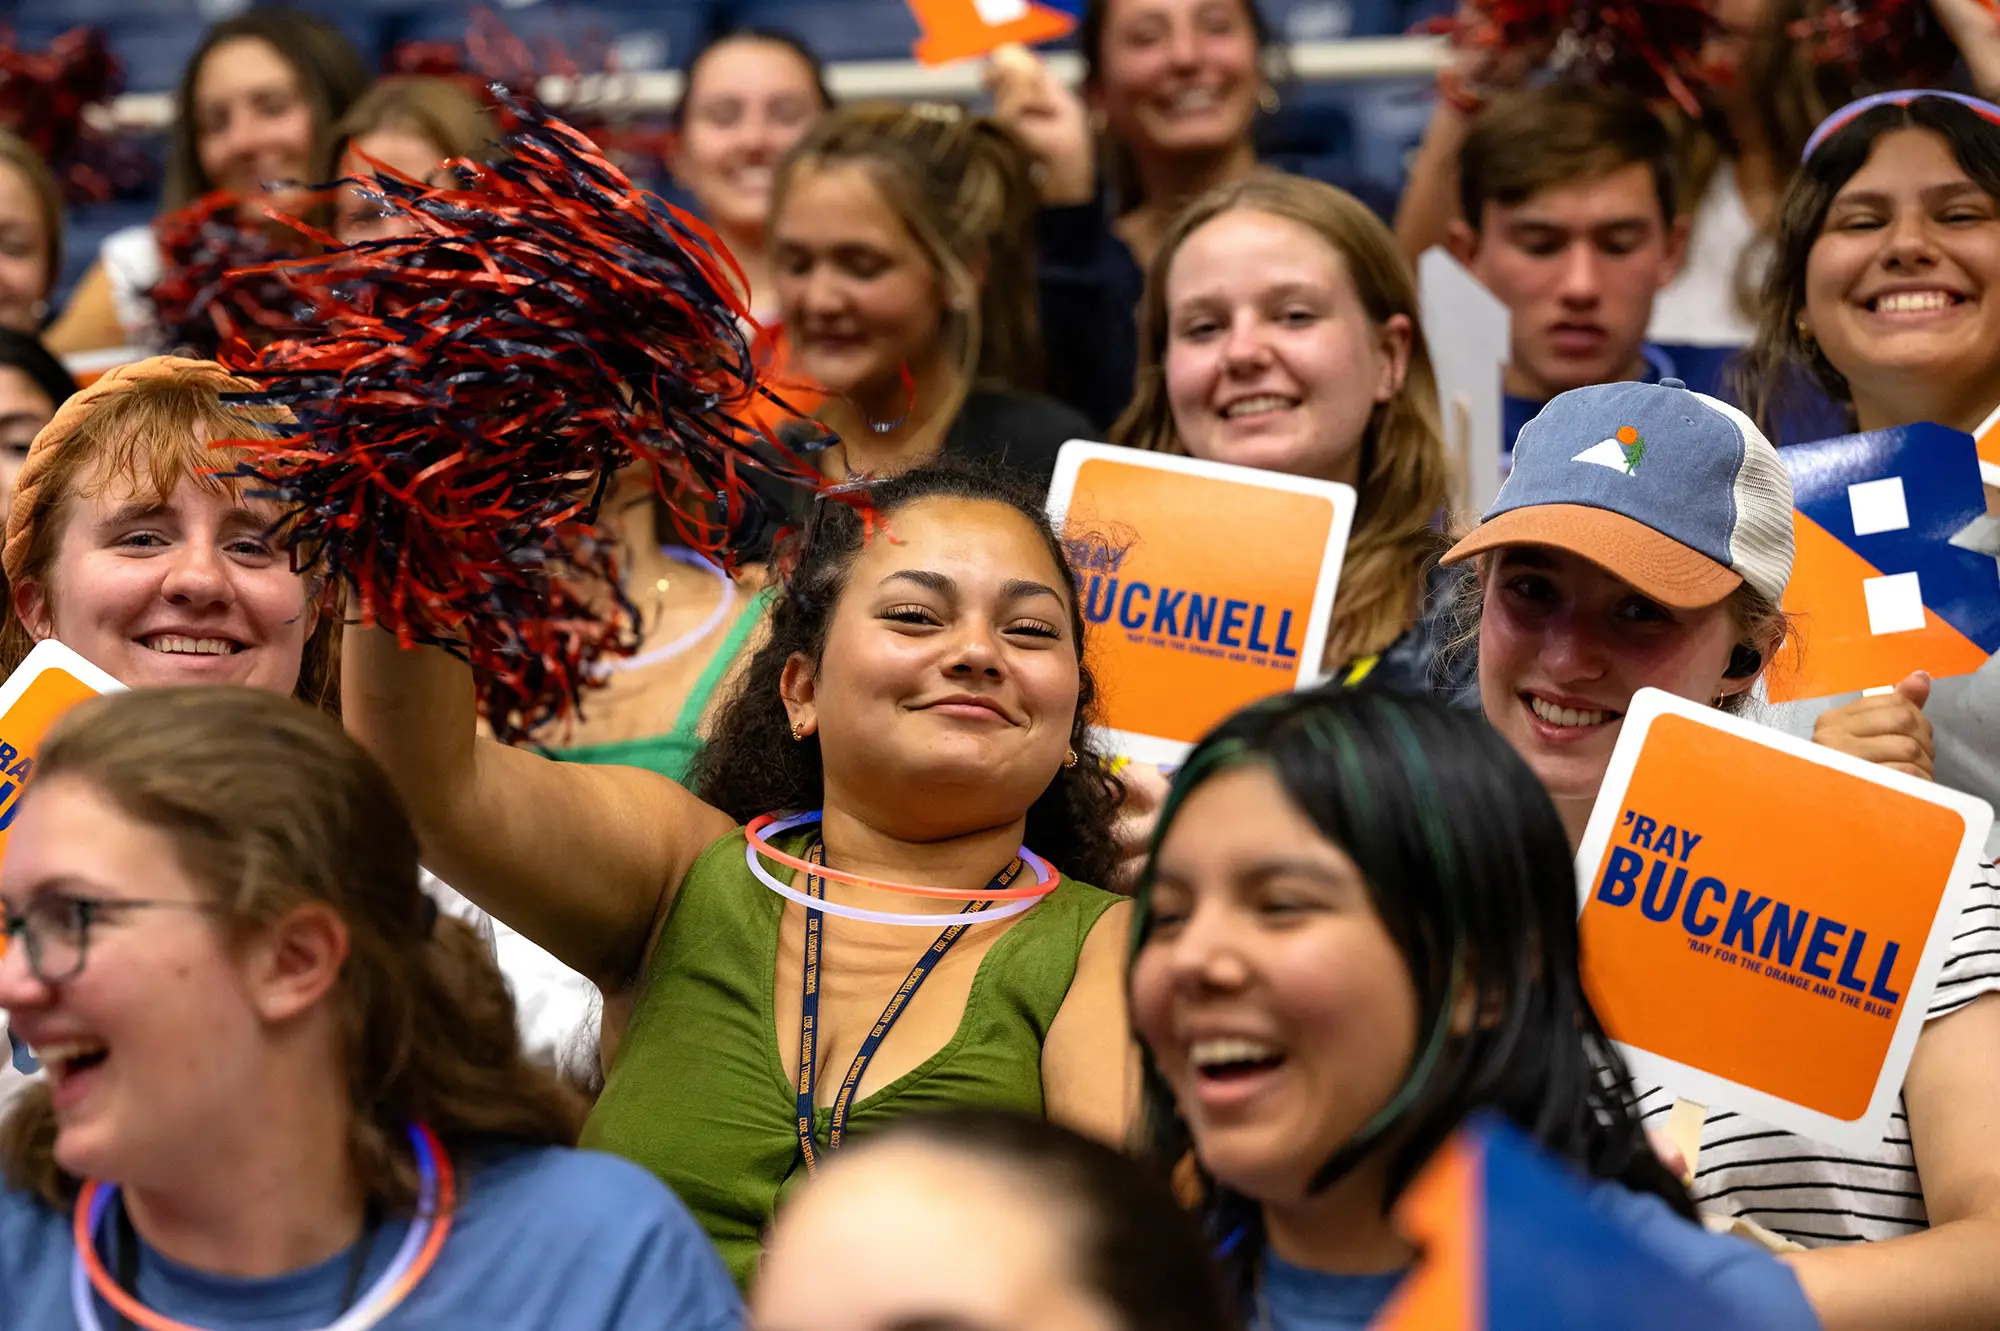 Student in crowd at orientation cheering with a pom-pom